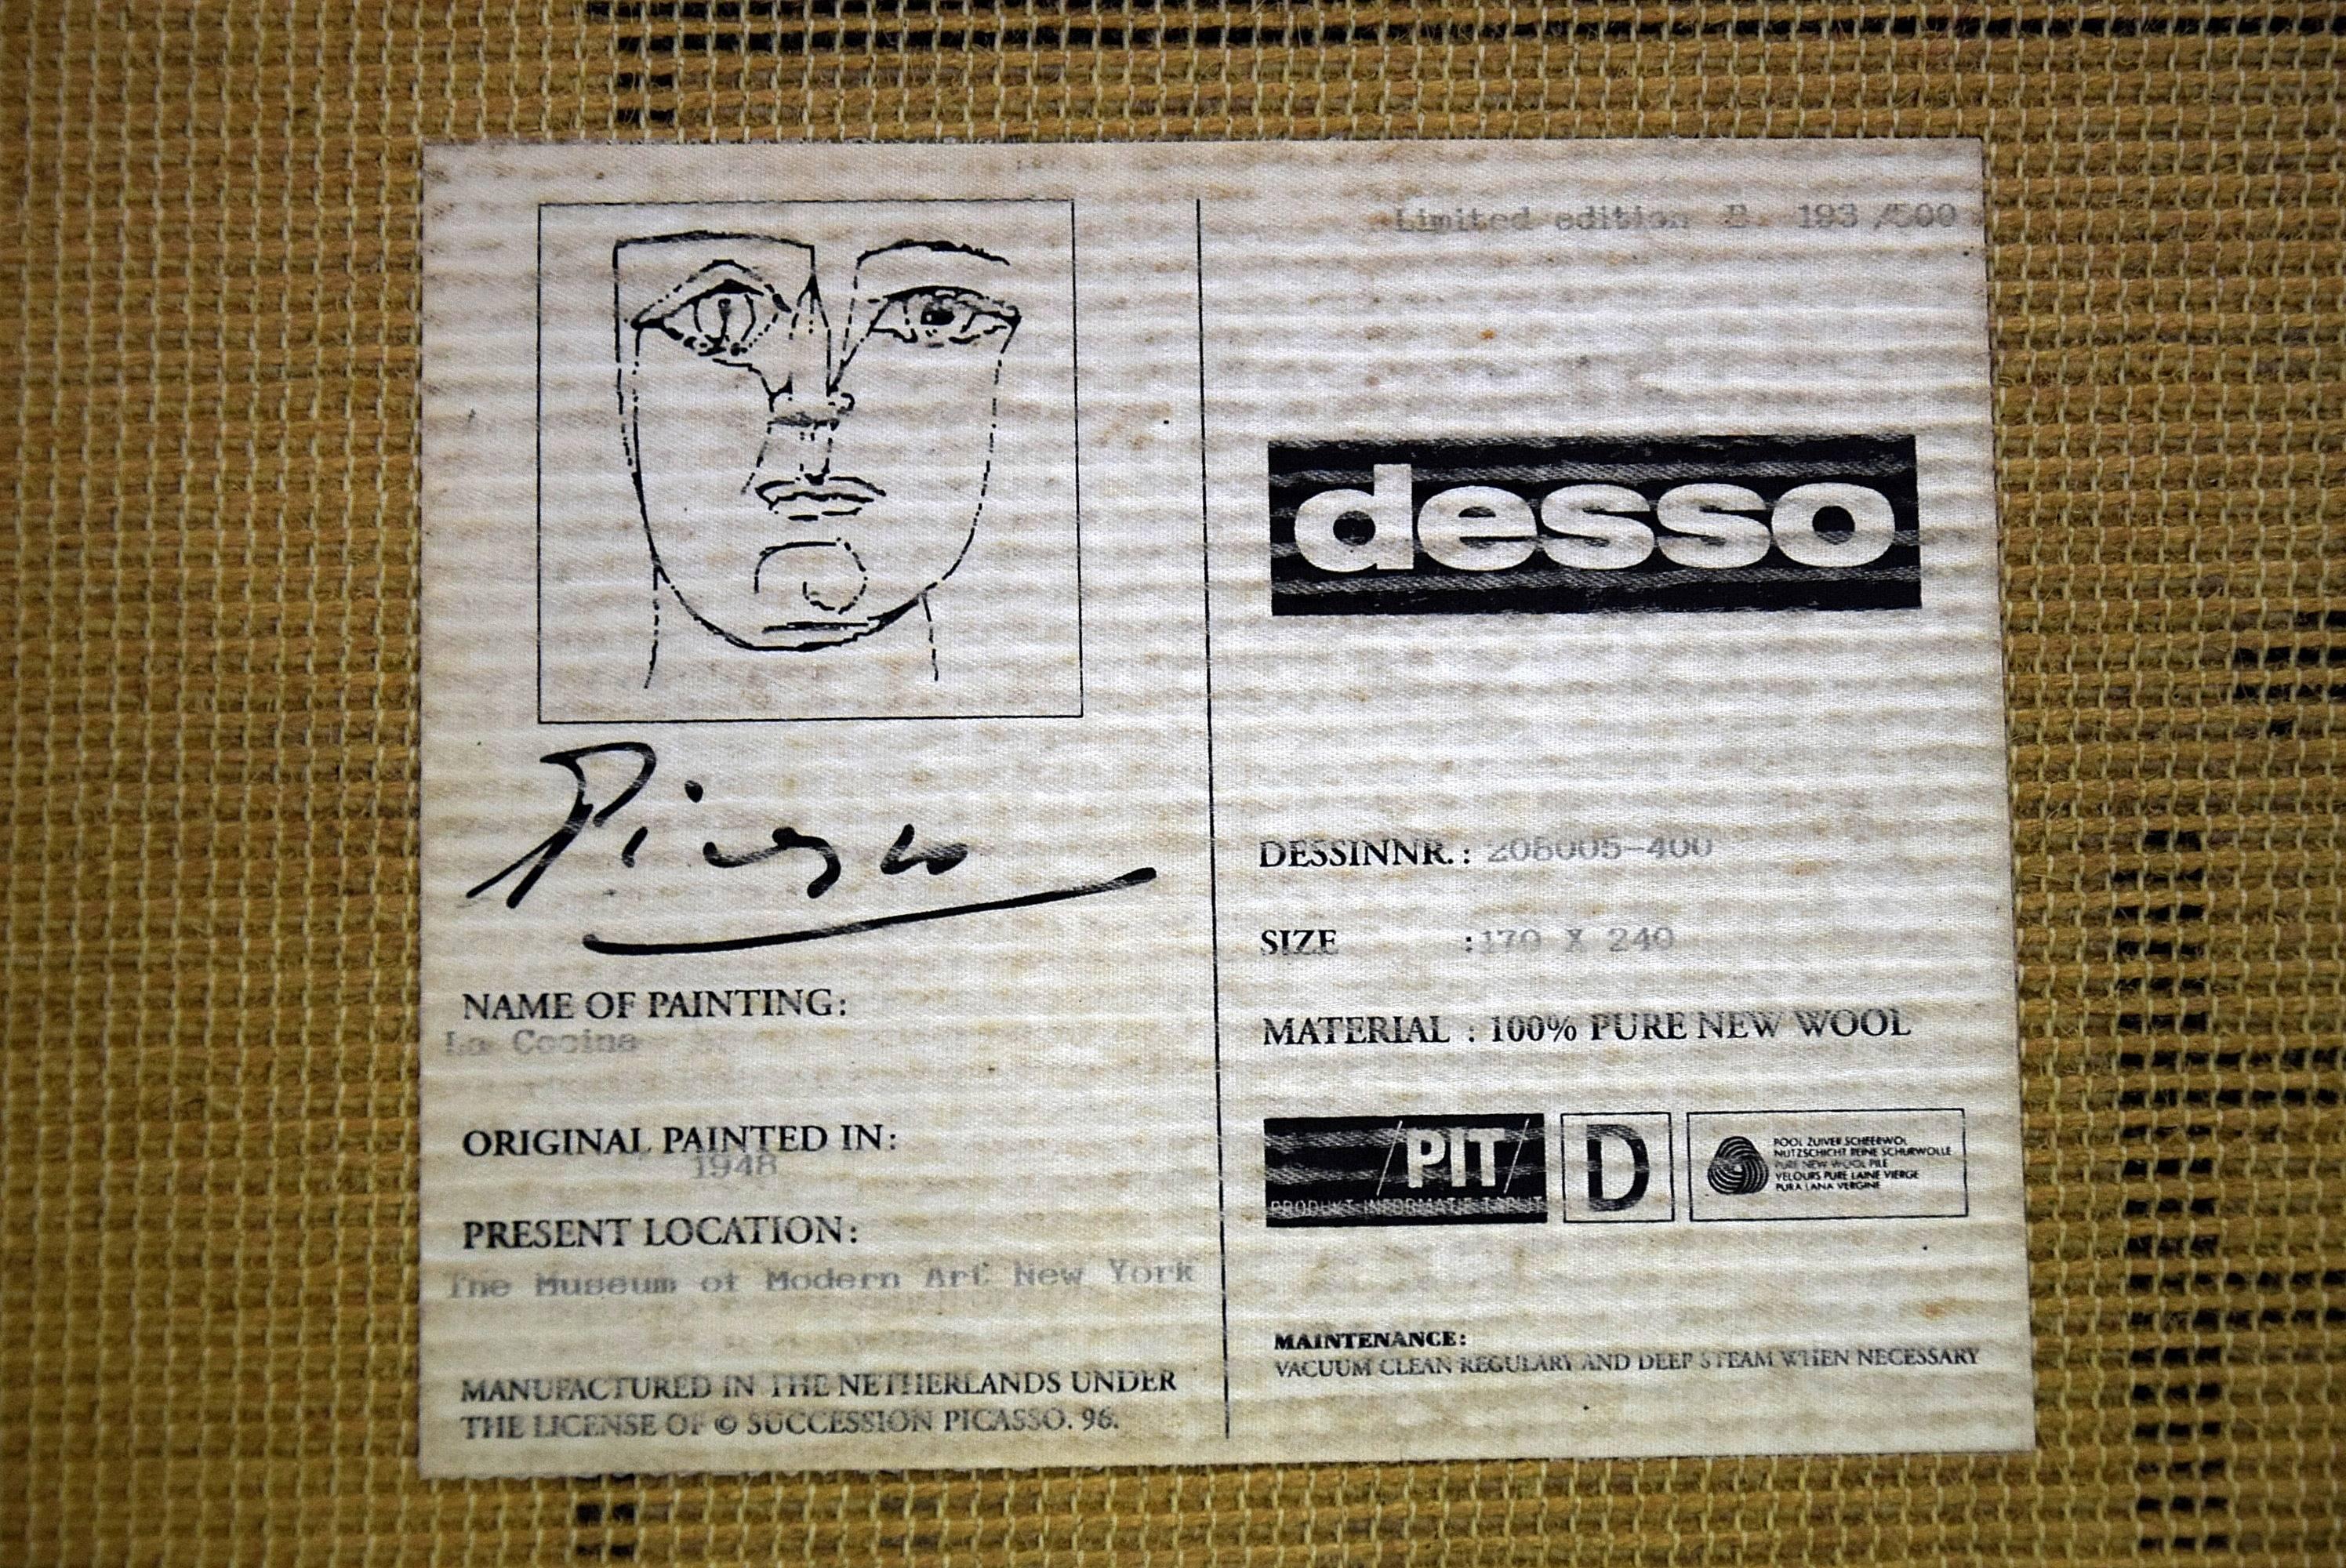 Wool Pablo Picasso (after) La Cocina Limited Edition Art Rug